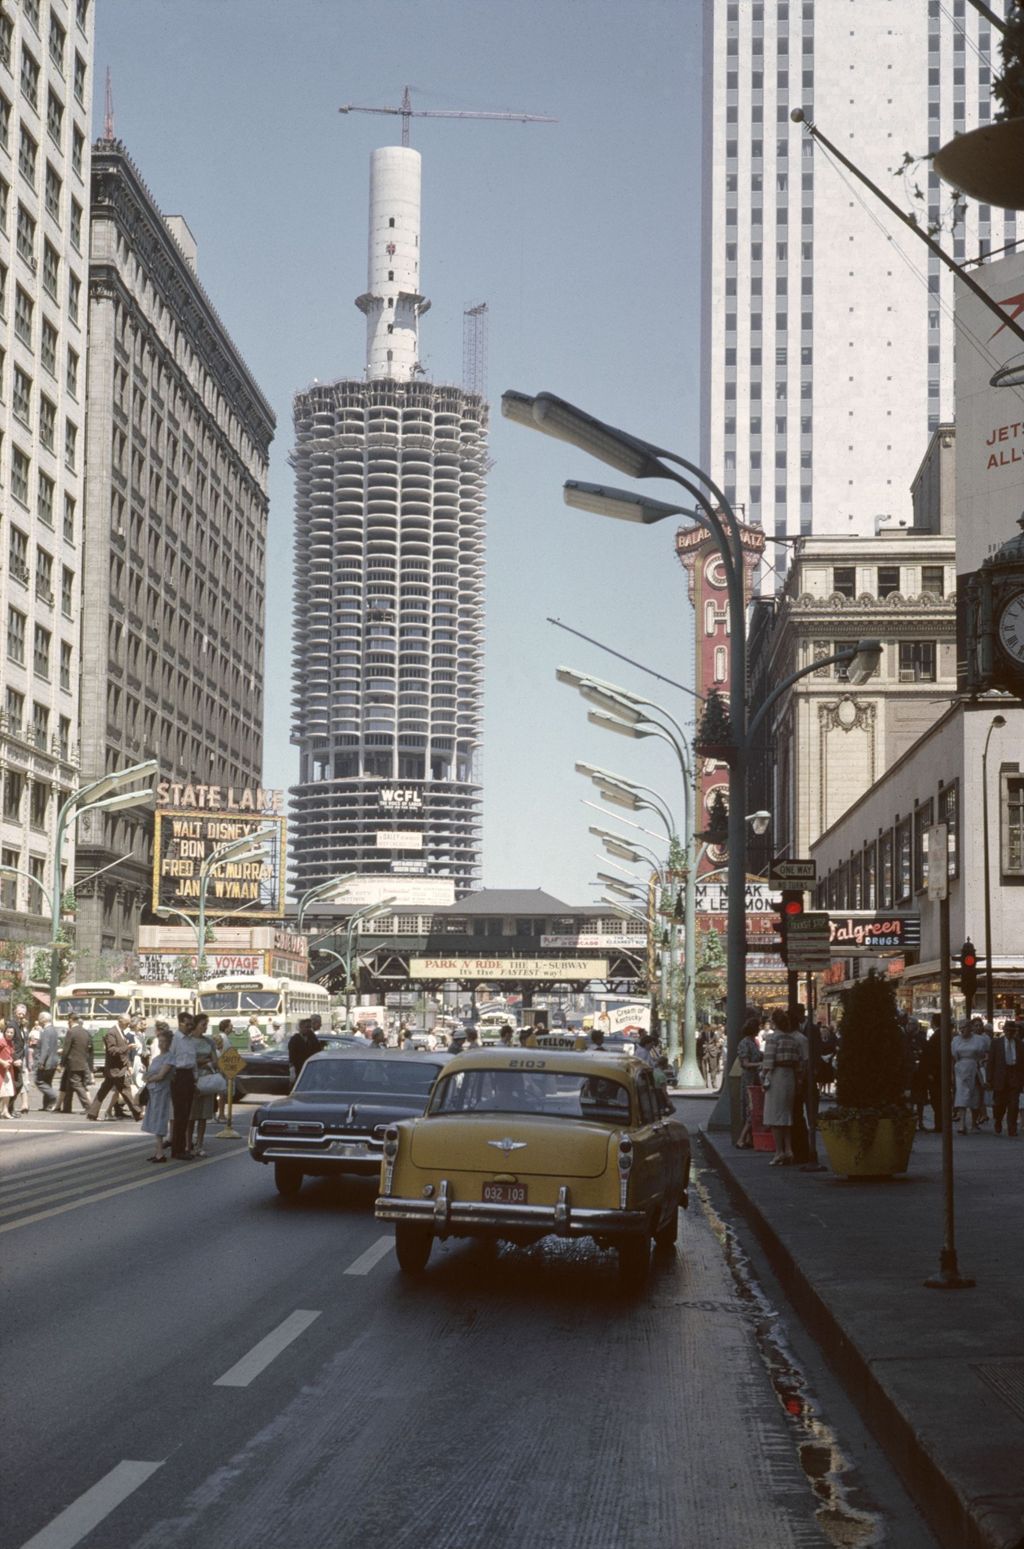 Miniature of State Street, and Marina City under construction